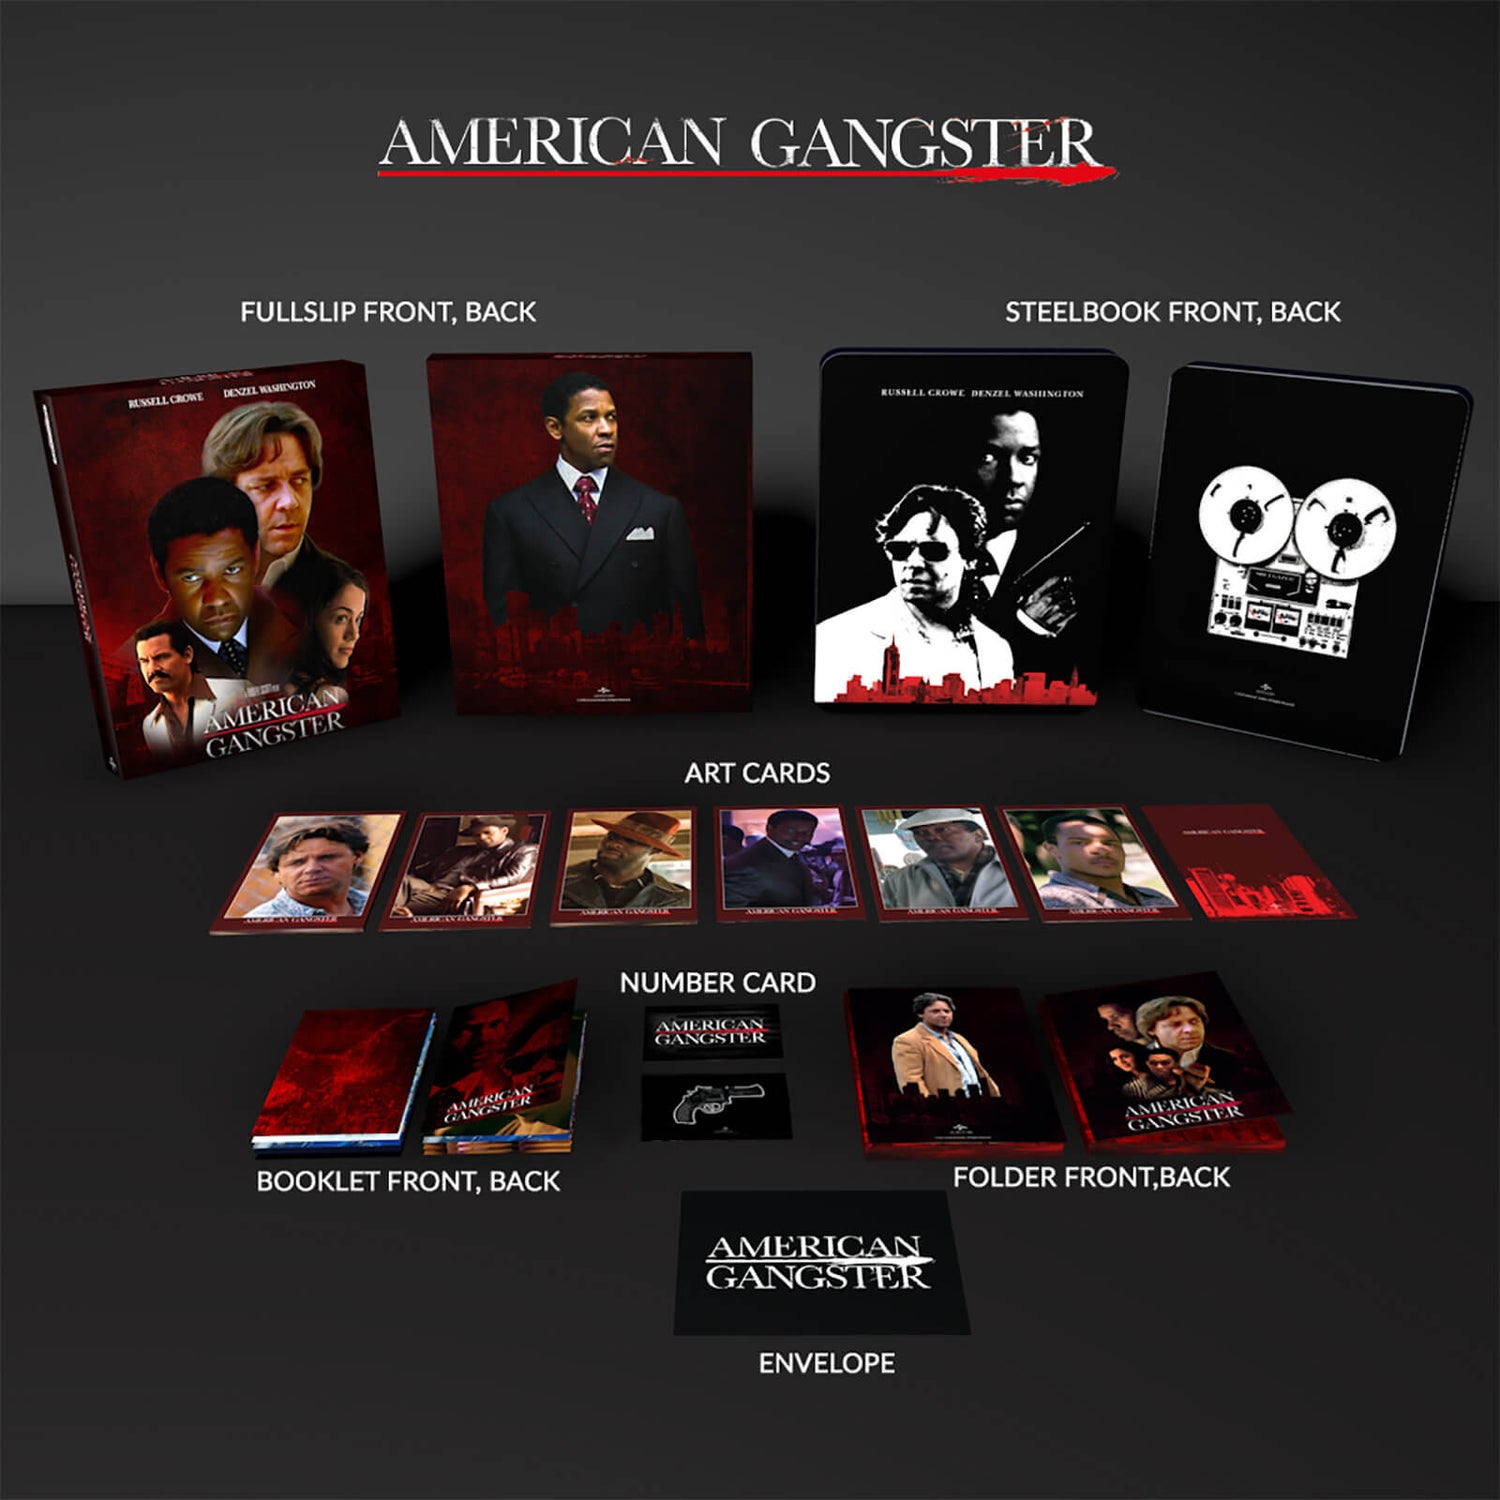 American Gangster - Steelbook 4K Ultra HD Édition Limitée Collector (Blu-ray inclus)